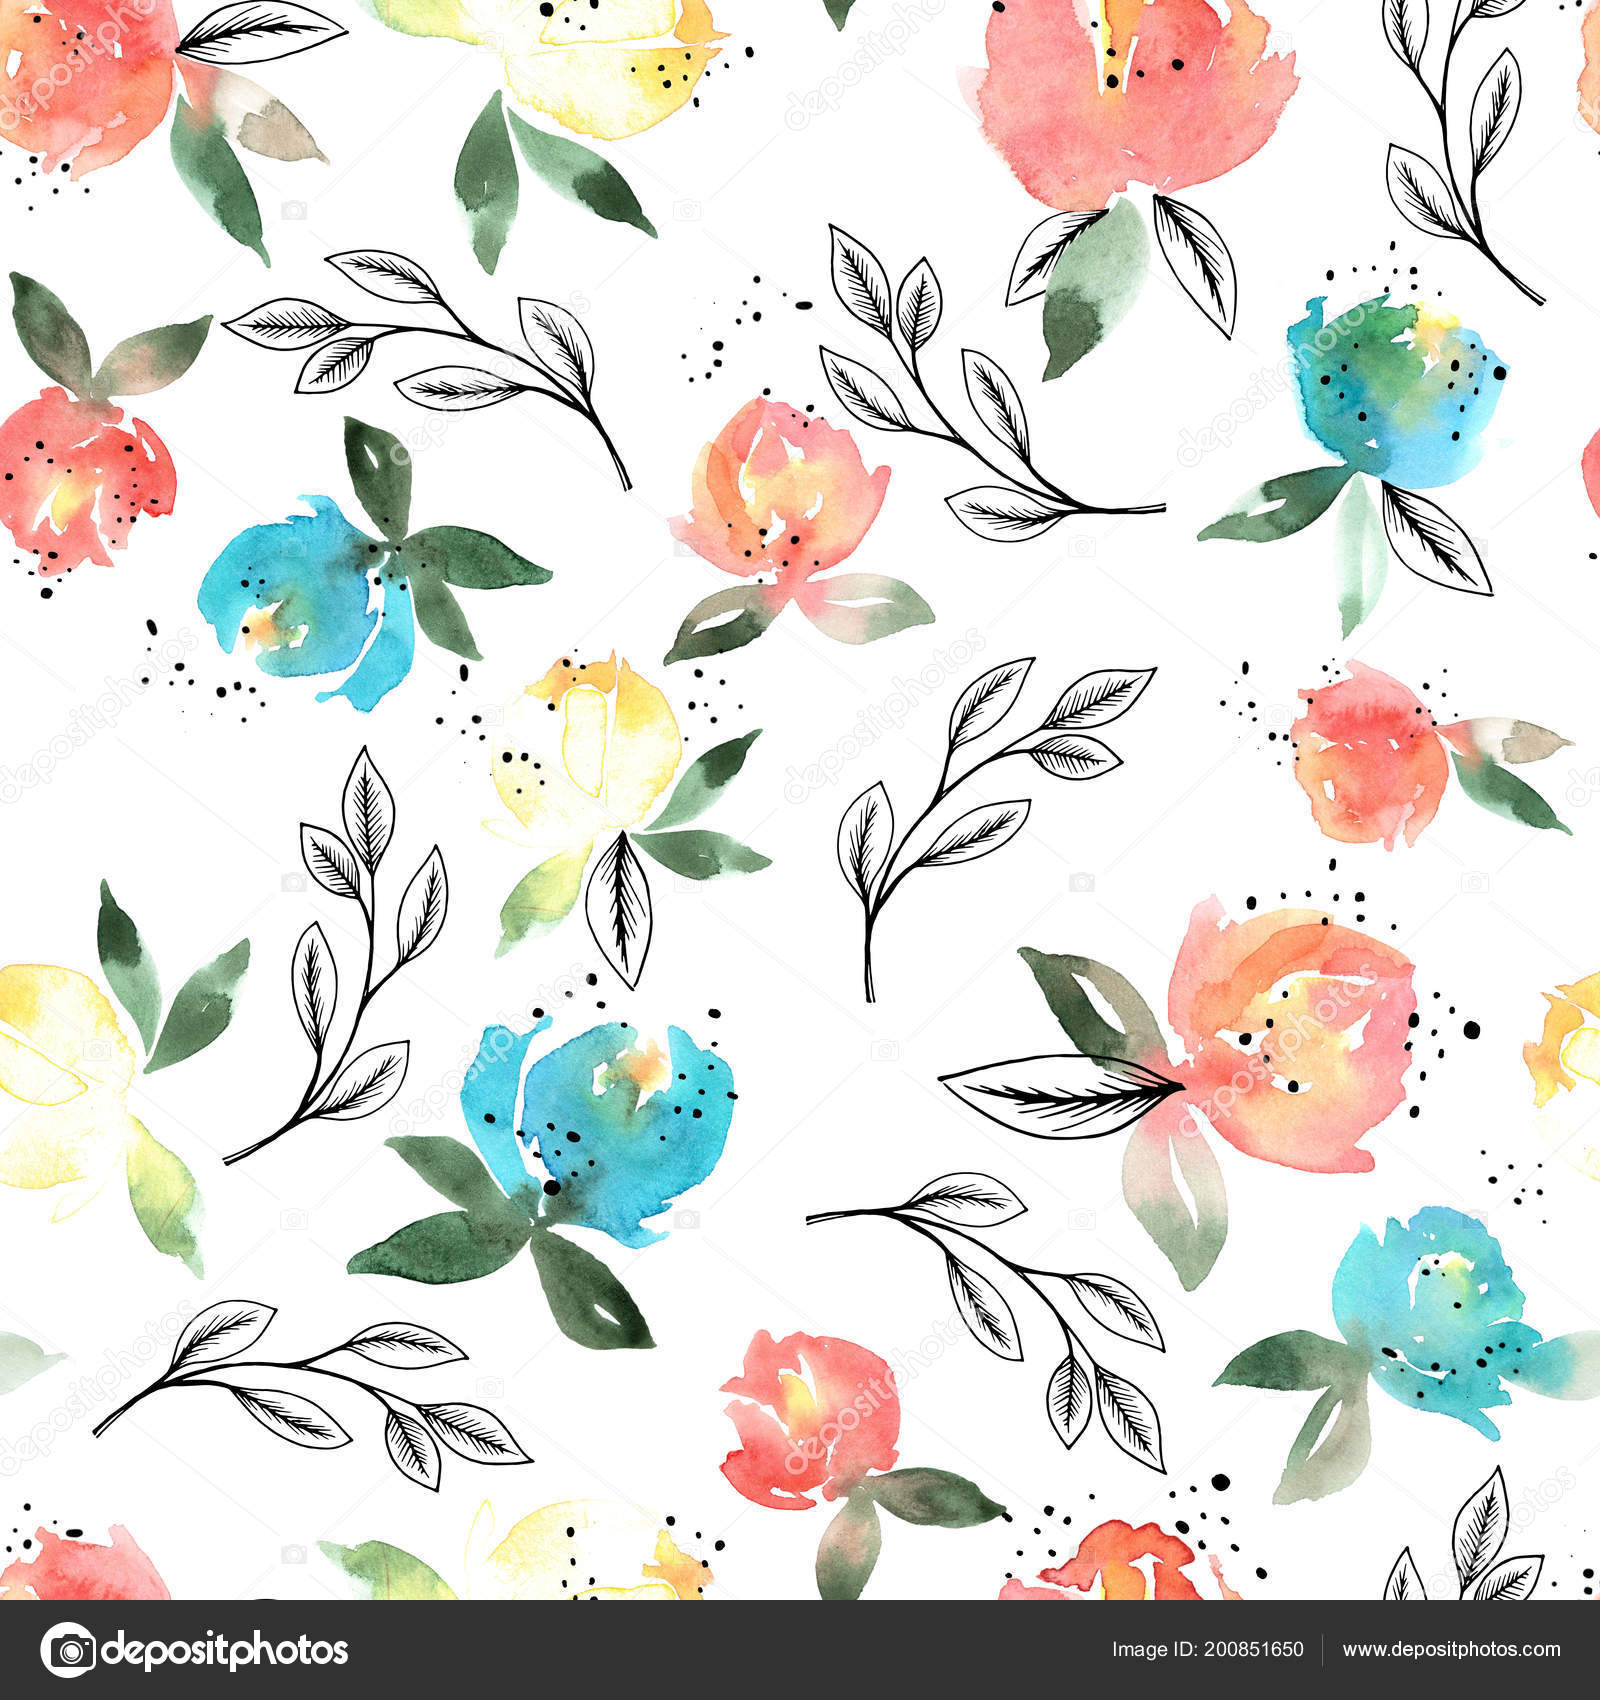 Watercolor Flowers Seamless Watercolor Floral Pattern - Watercolor Florals Seamless , HD Wallpaper & Backgrounds